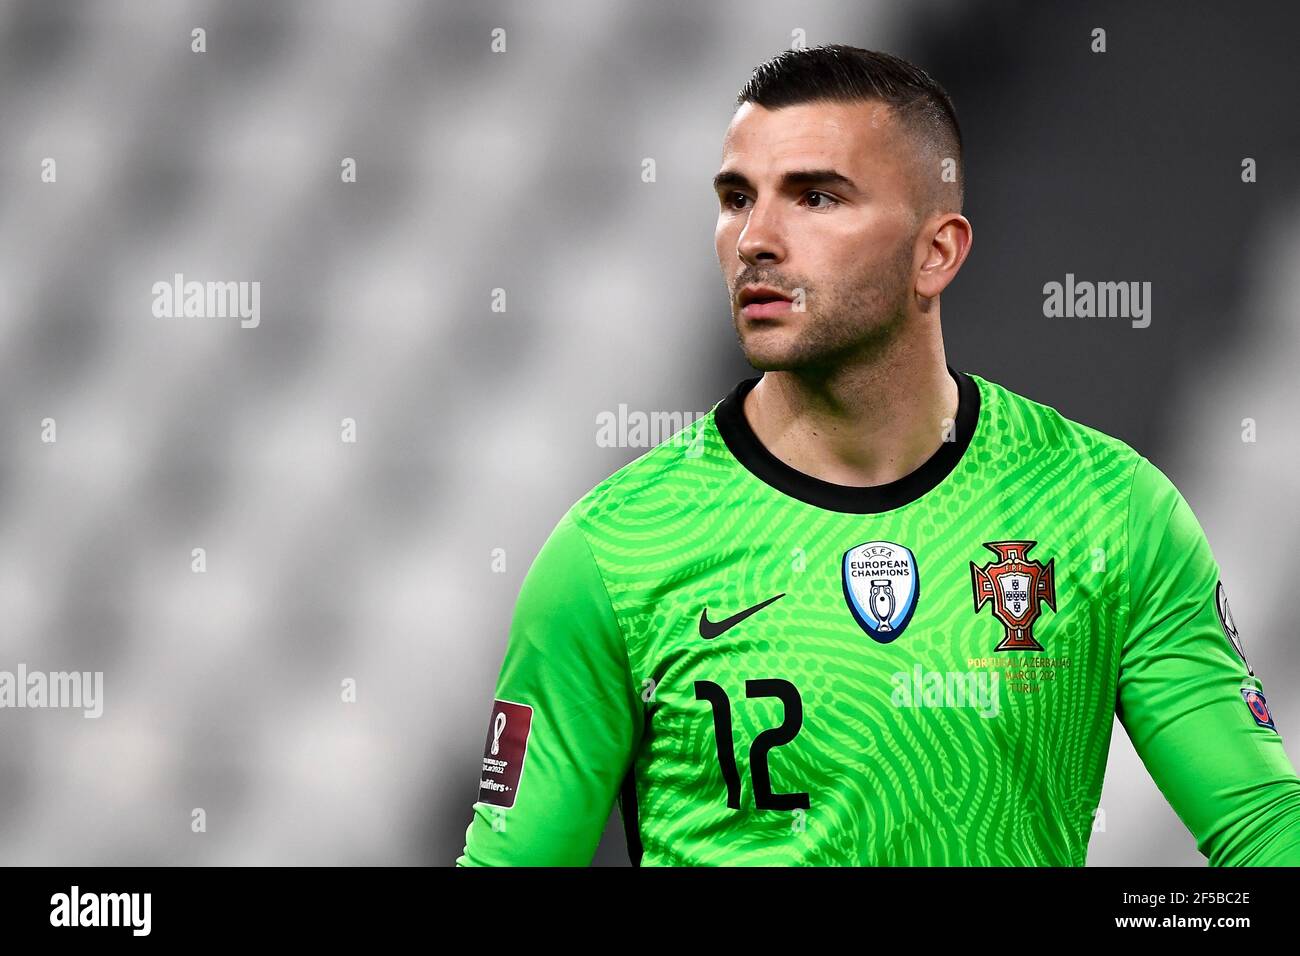 Turin, Italy - 24 March, 2021: Anthony Lopes of Portugal looks on during the FIFA World Cup 2022 Qatar qualifying football match between Portugal and Azerbaijan. Portugal face Azerbaijan at a neutral venue in Turin behind closed doors to prevent the spread of Covid-19 variants. Portugal won 1-0 over Azerbaijan. Credit: Nicolò Campo/Alamy Live News Stock Photo